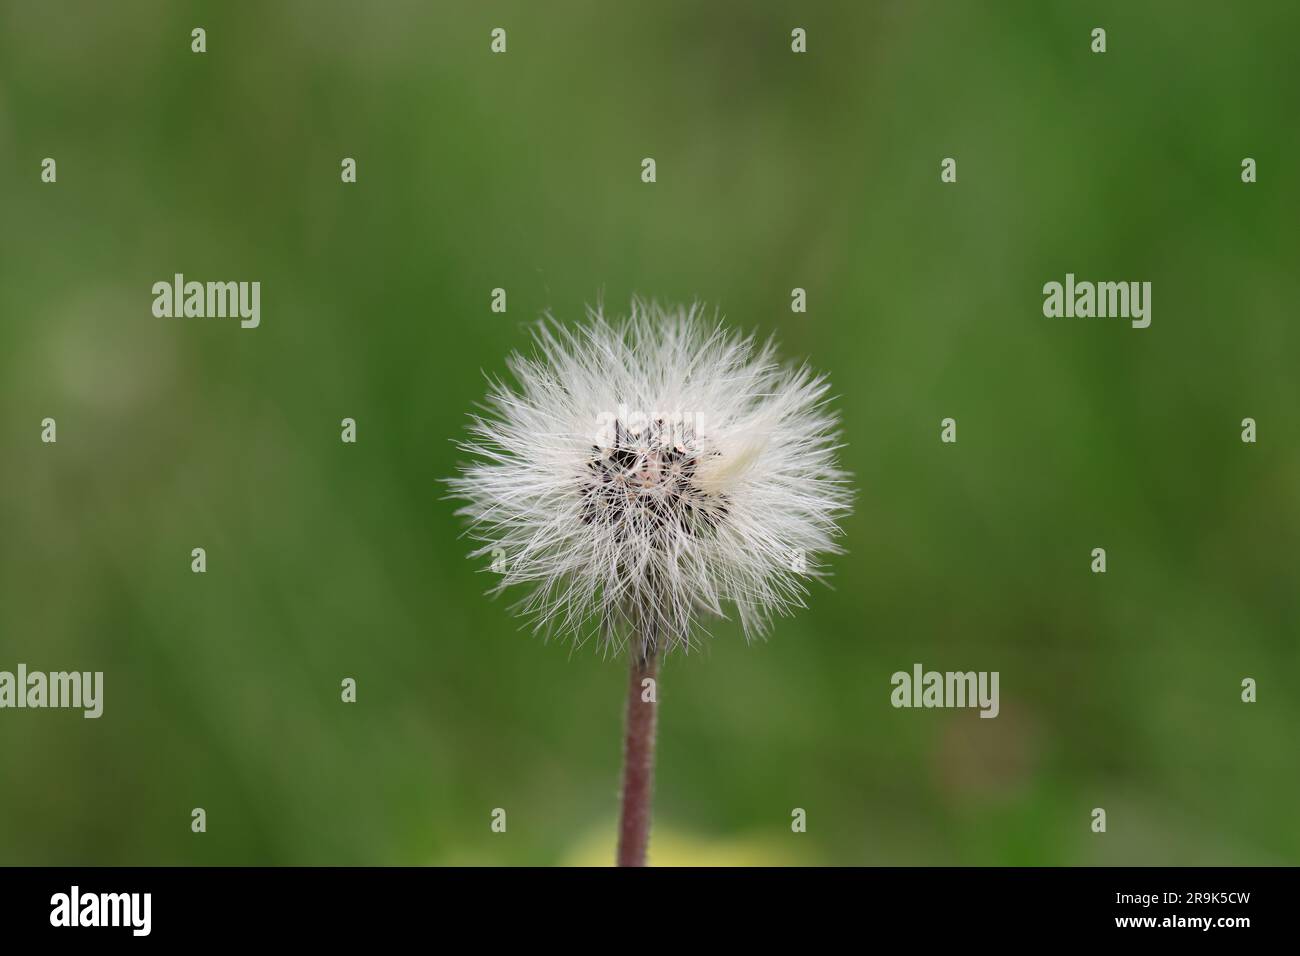 Fruiting of a hawkweed against a green blurry background, close-up, copy space Stock Photo